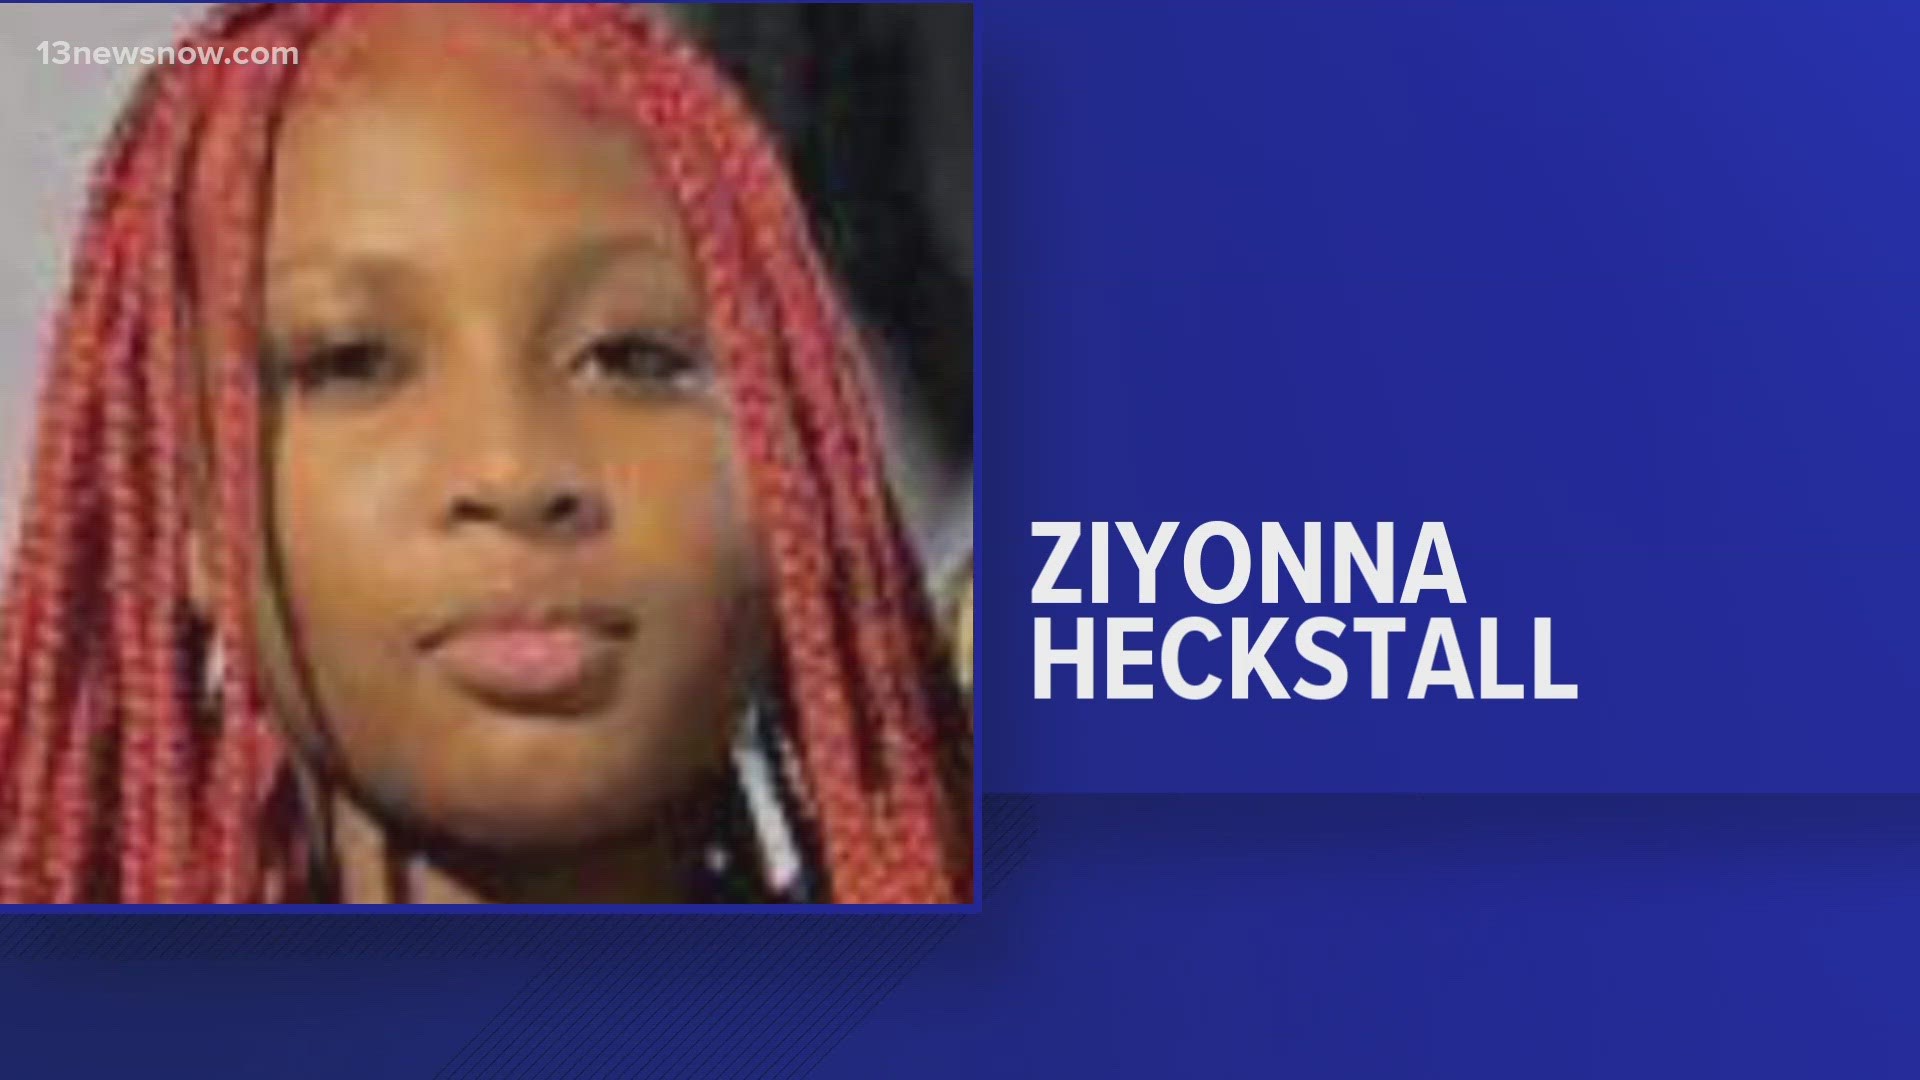 Ziyonna Heckstall was last seen around 11:30 a.m. on Friday in the 500 block of Ashlawn Drive.